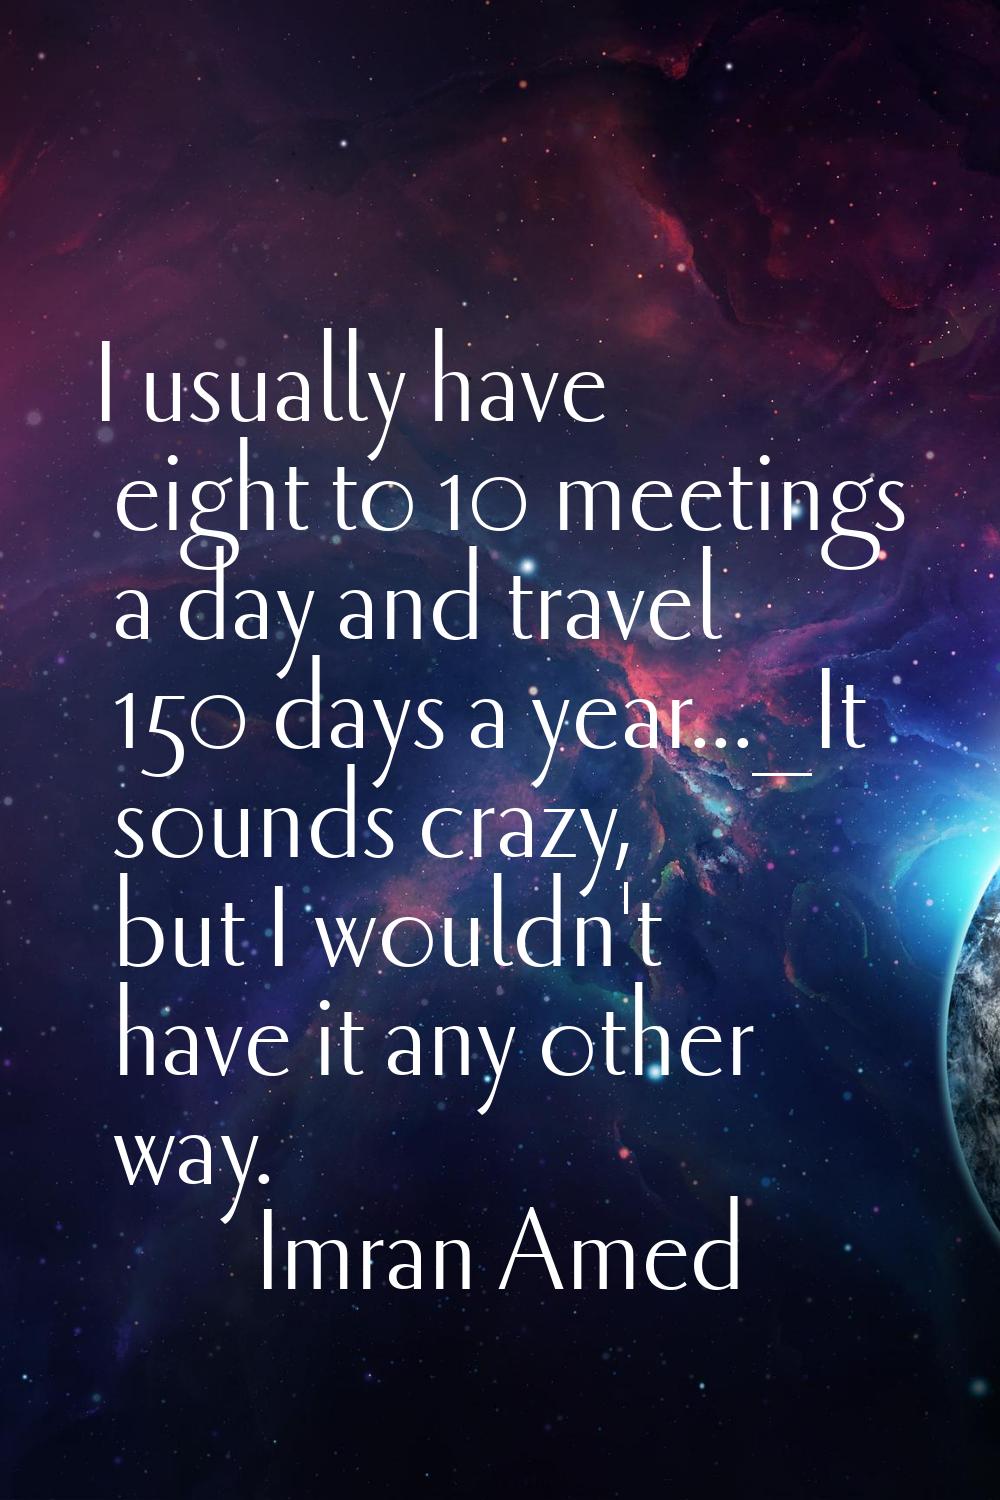 I usually have eight to 10 meetings a day and travel 150 days a year..._It sounds crazy, but I woul